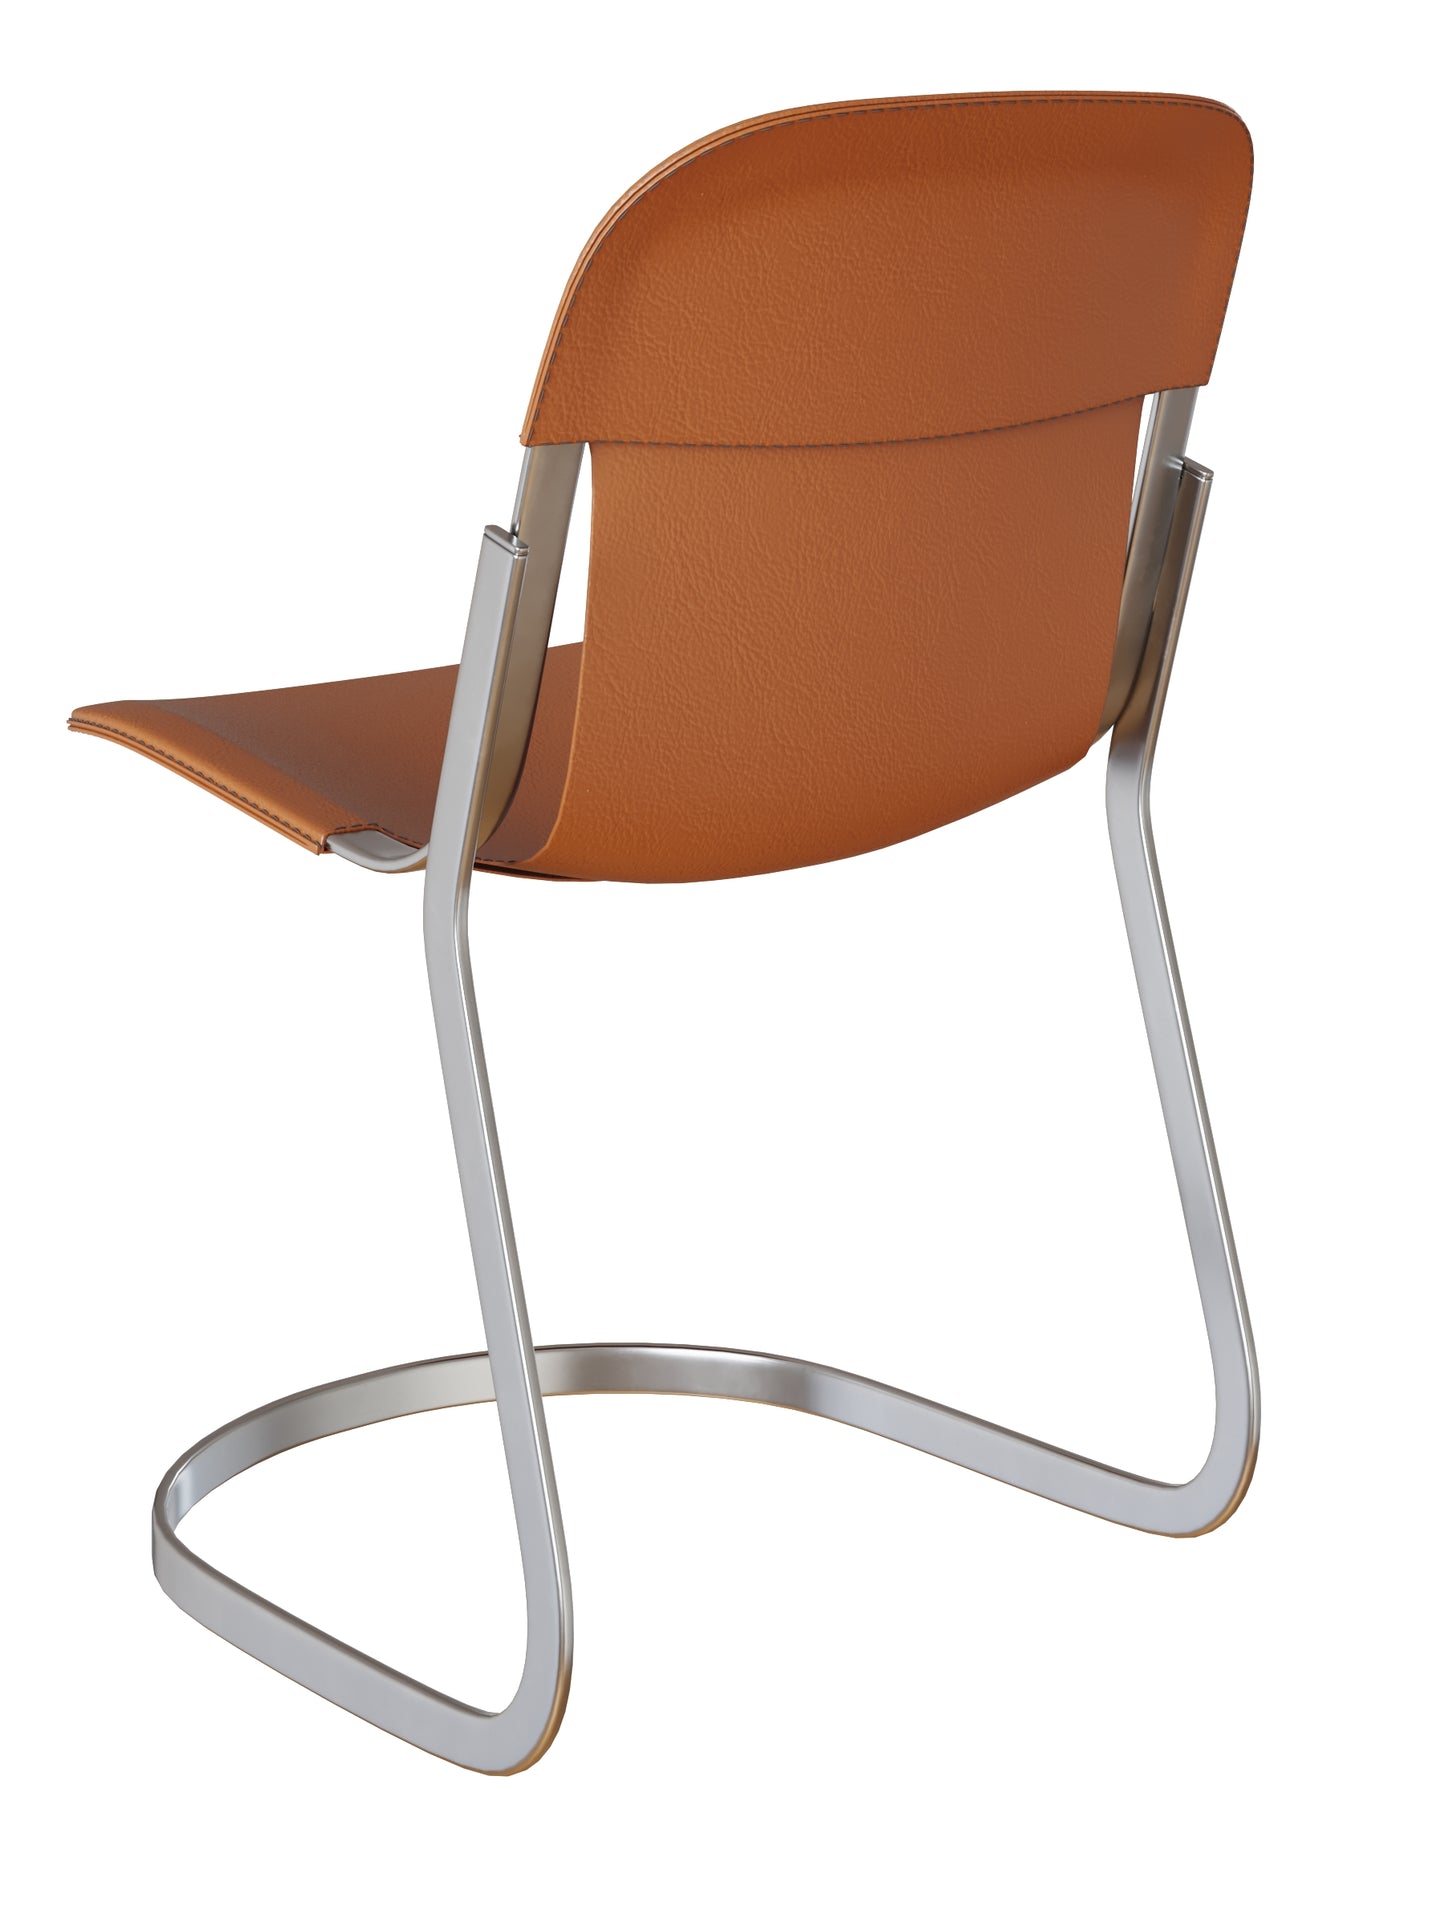 Willy-Rizzo-Chair-Back-3DModel-by-KrievoStore